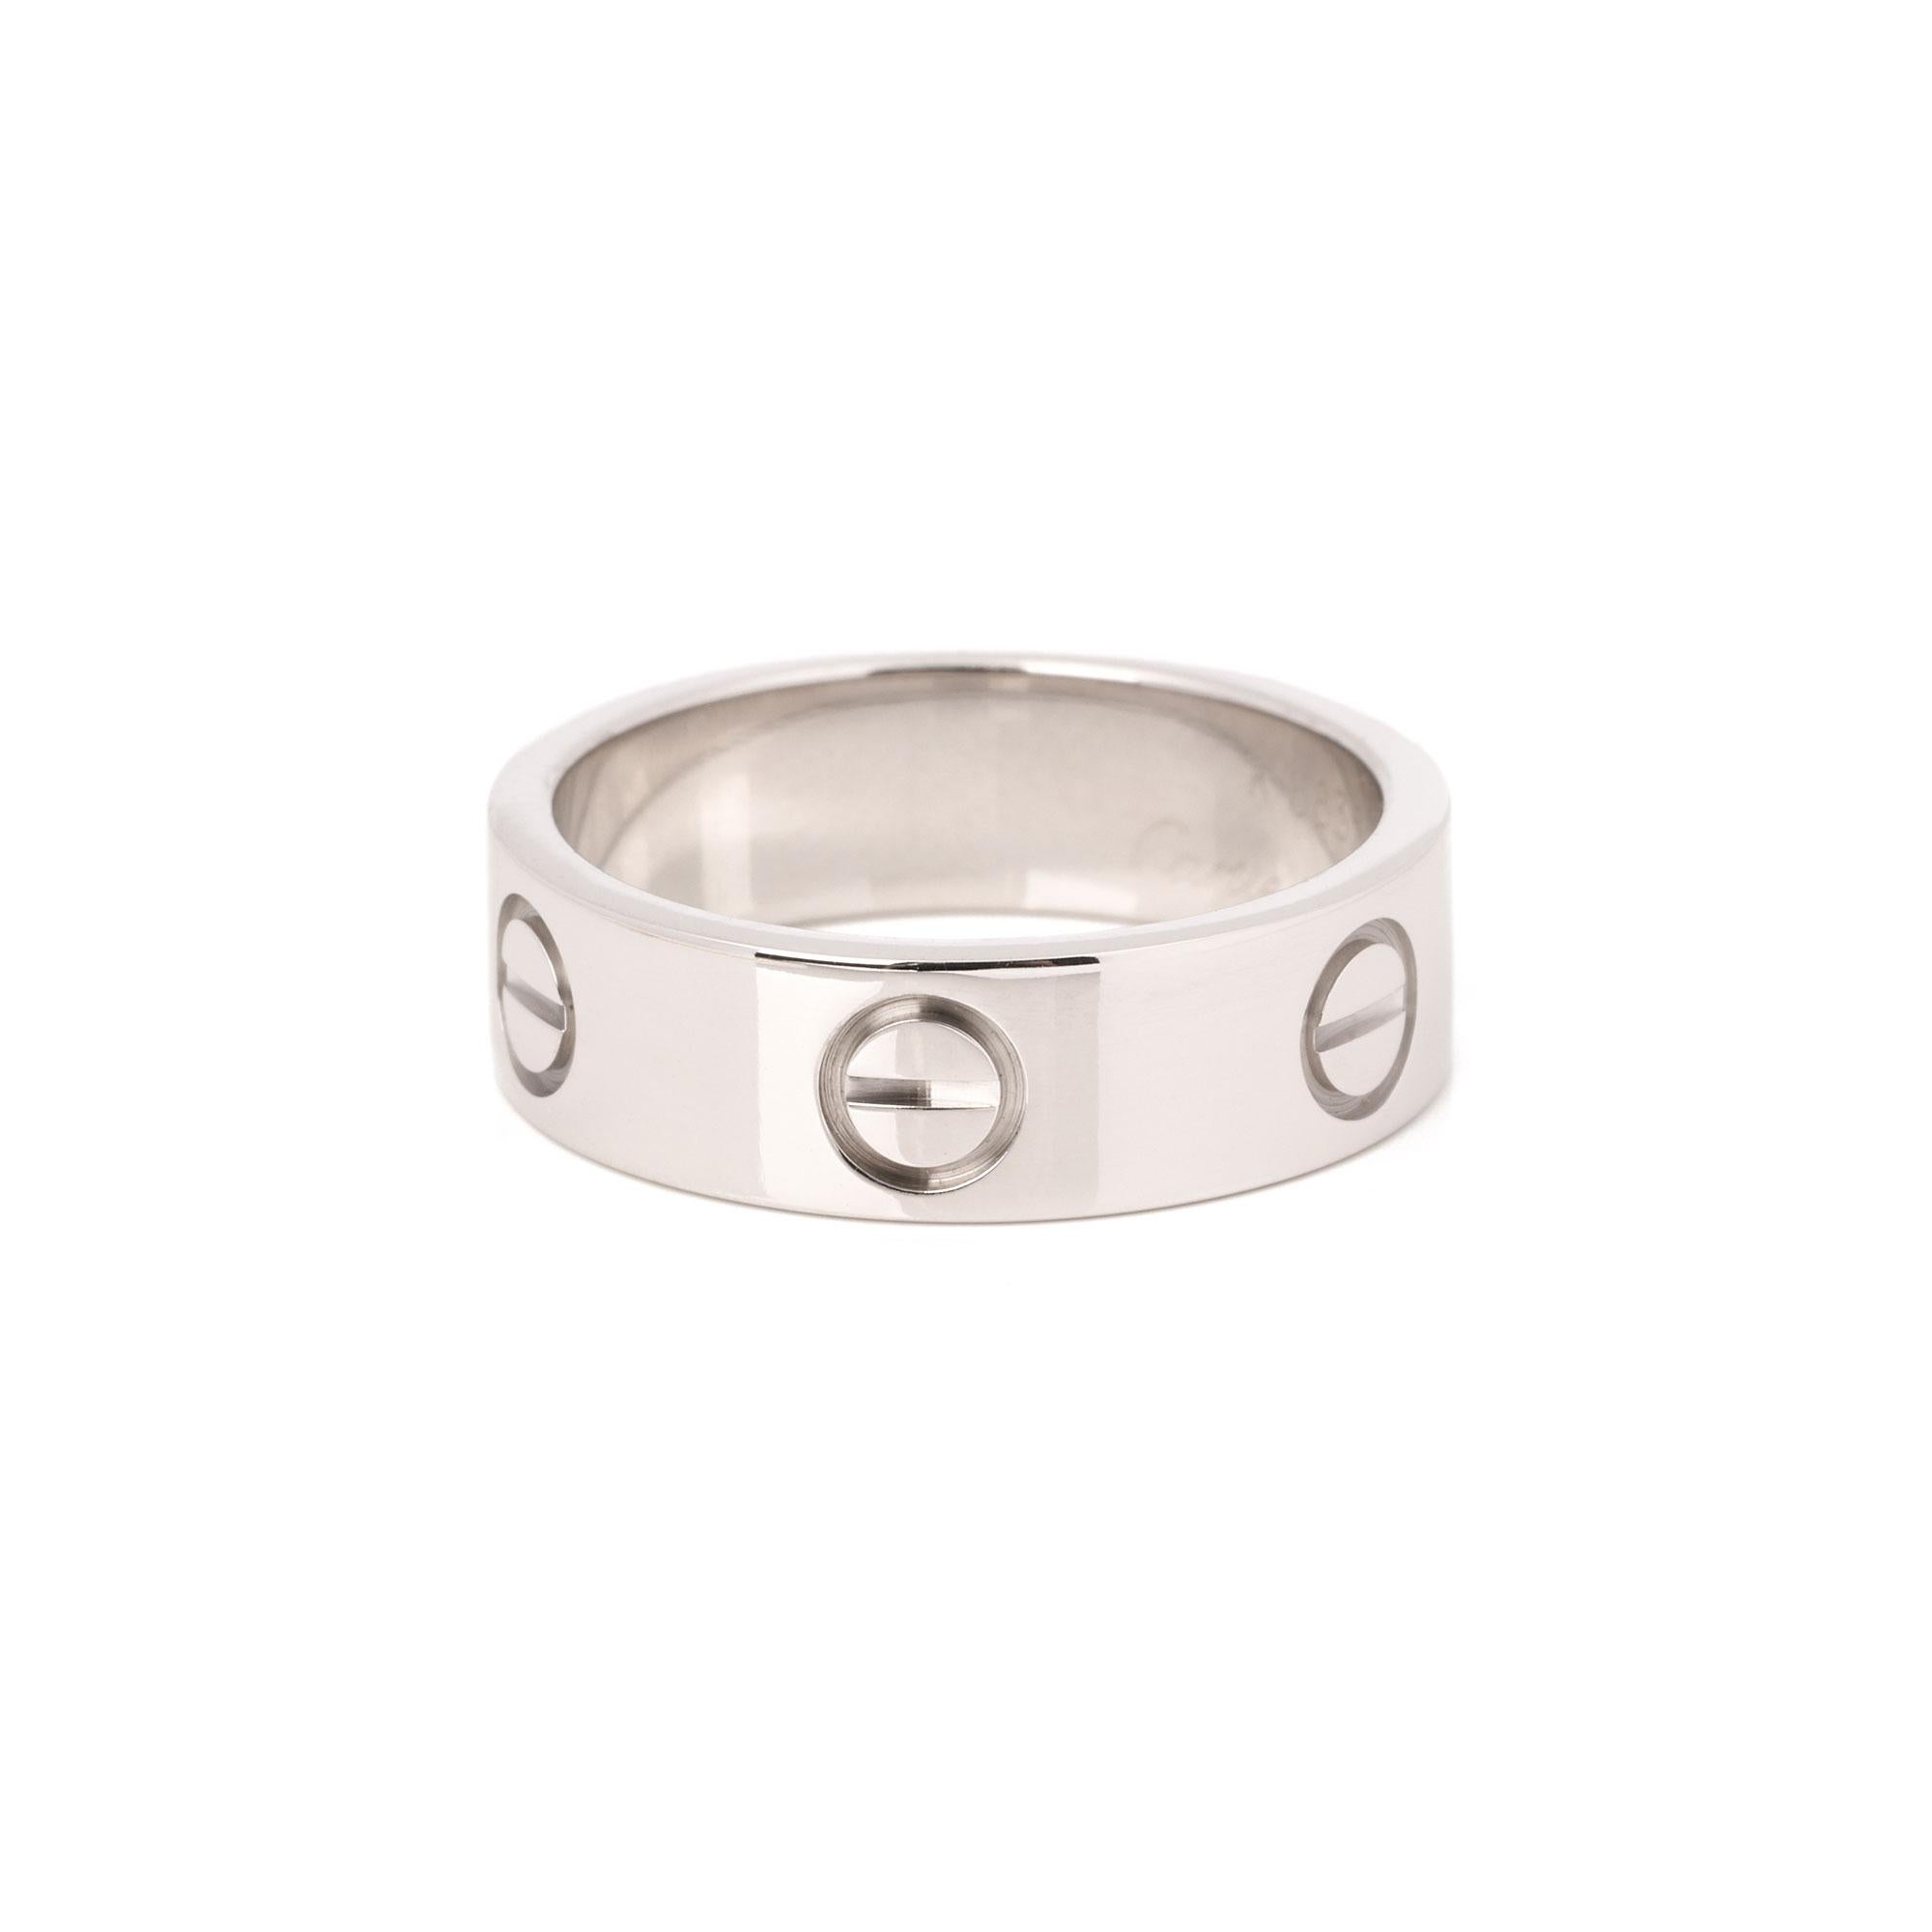 This ring by Cartier is from their Love collection and features their iconic screw detail in 18ct white gold. Complete with a Xupes presentation box. Our Xupes reference is J590 should you need to quote this. UK ring size K. EU ring size 50. US ring